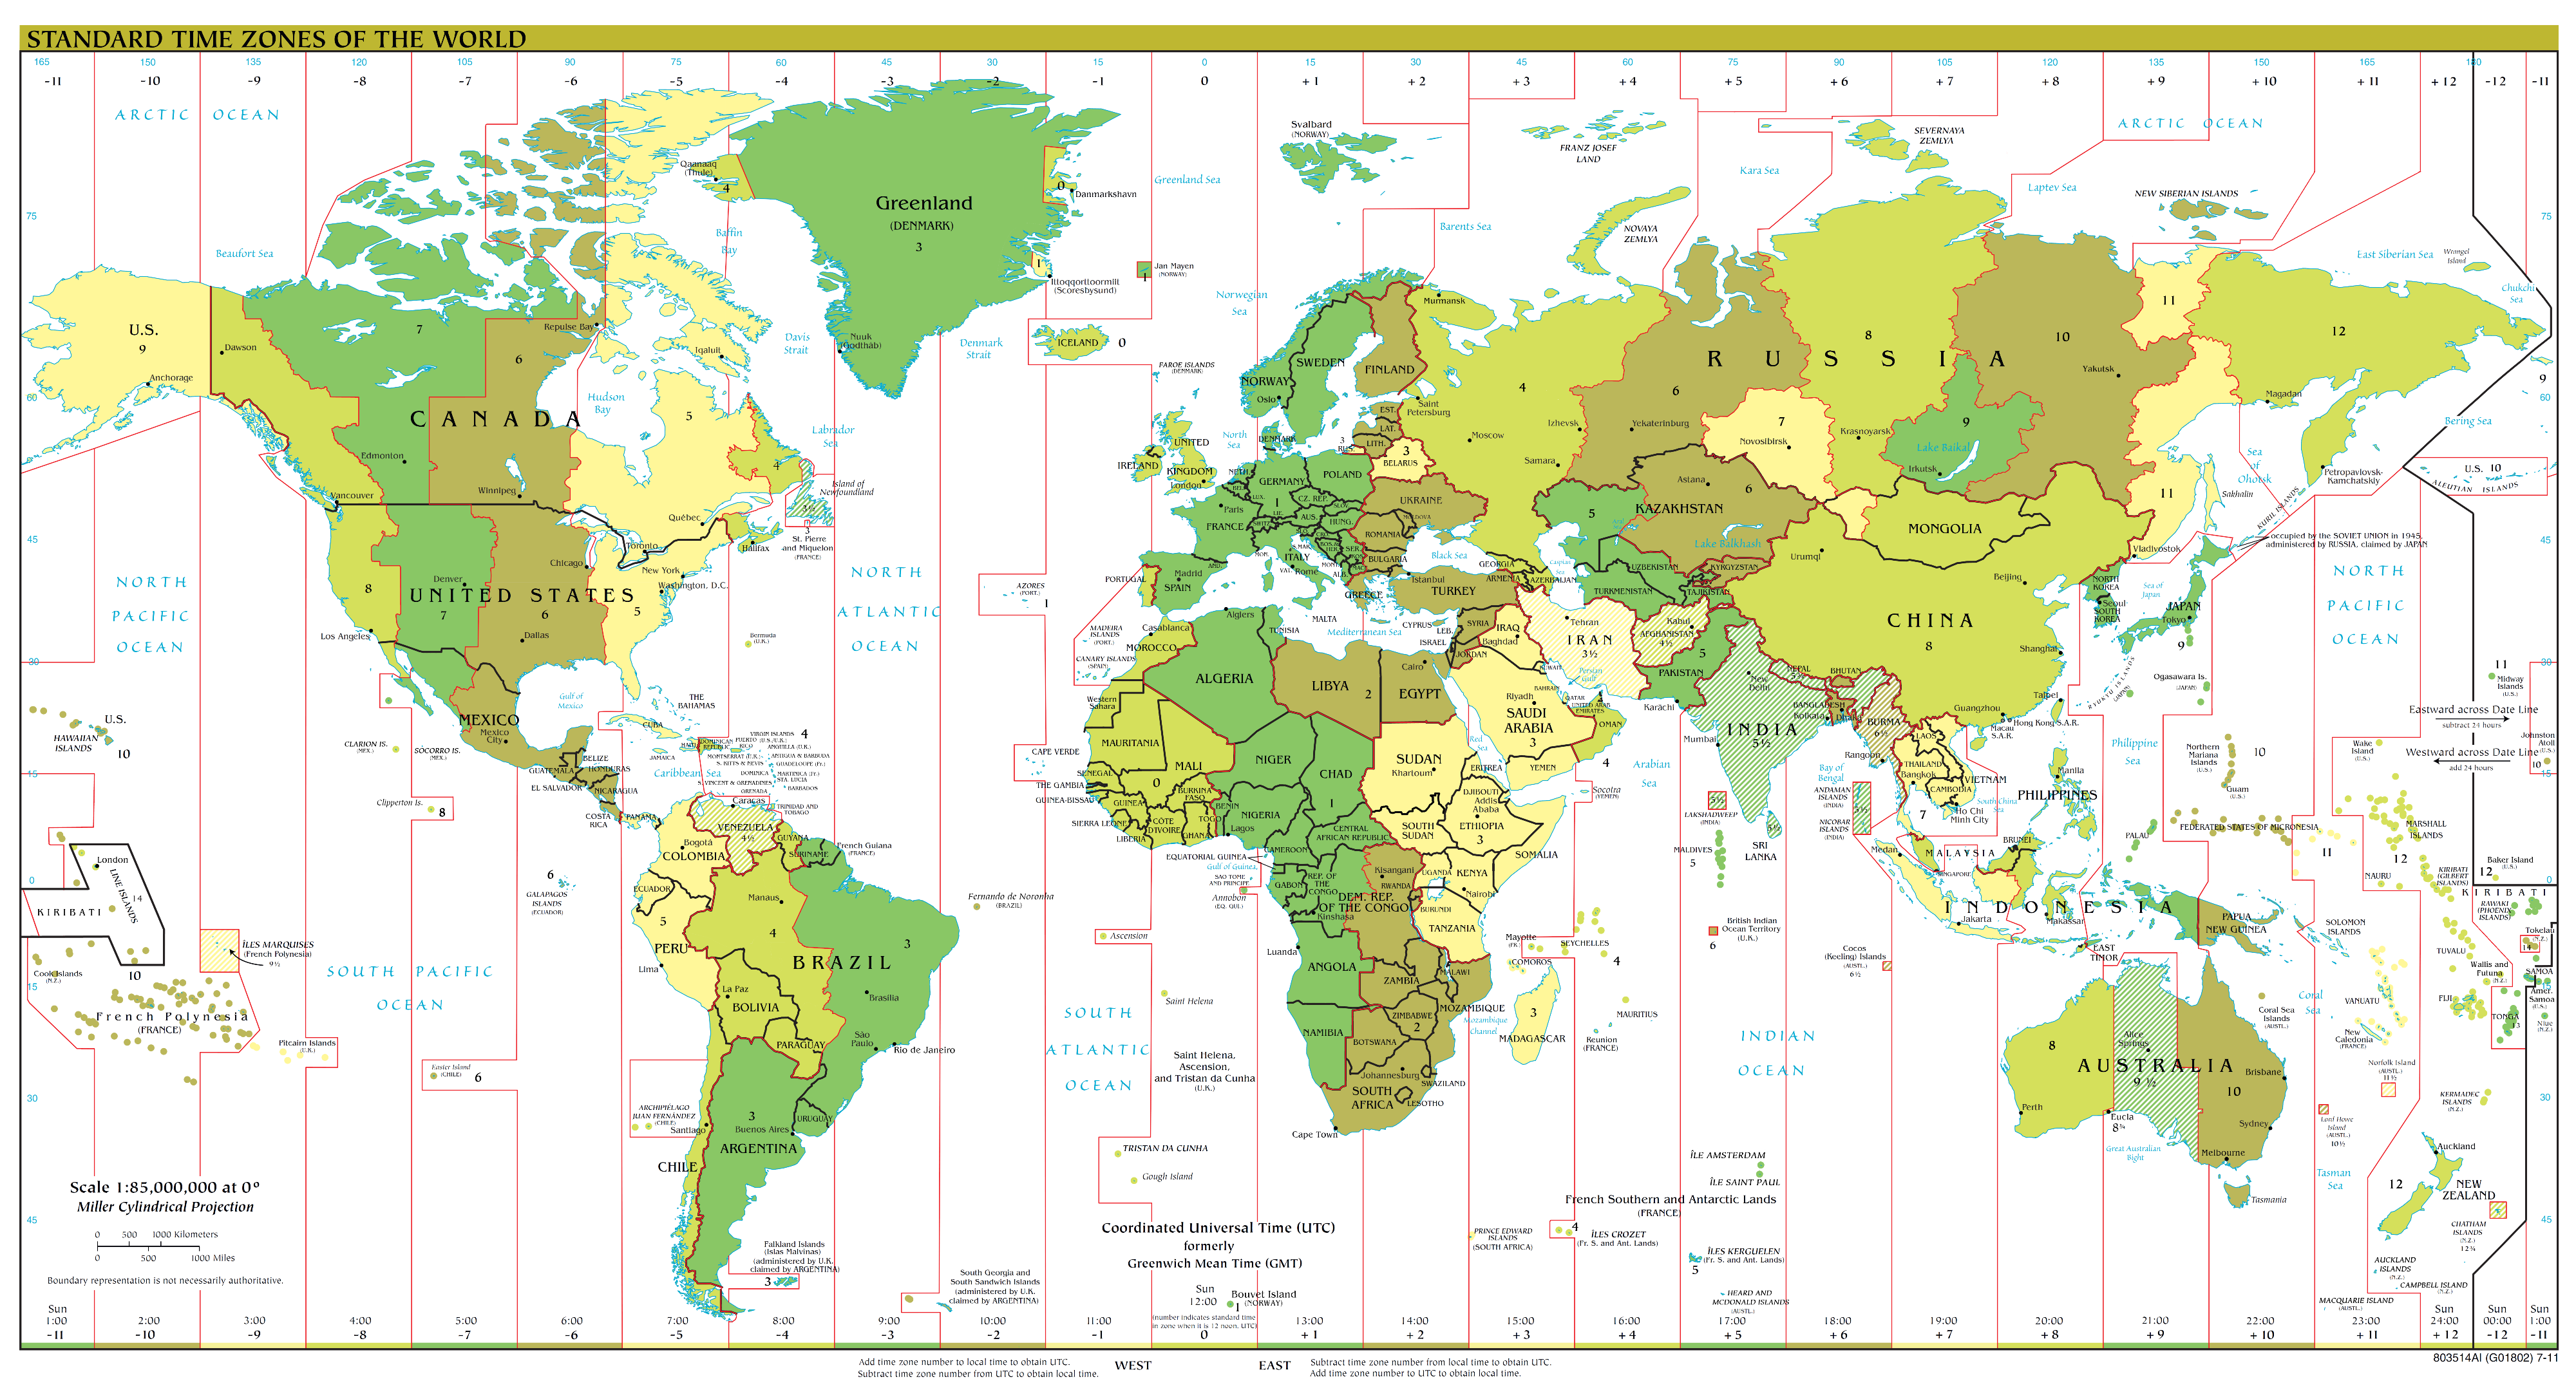 Standard Time Zones For 2012 Time Zone Map World Time Zones 